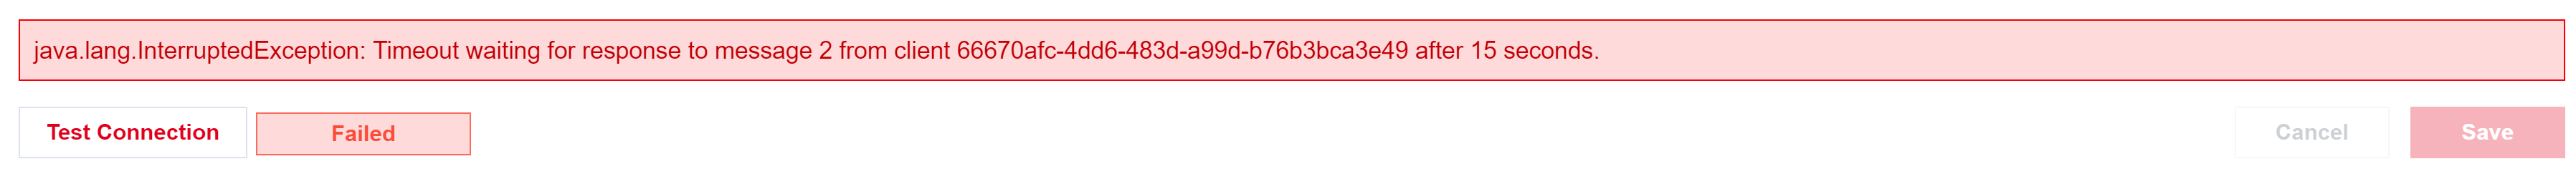 IdentityNow Source Error connecting to RACF.PNG